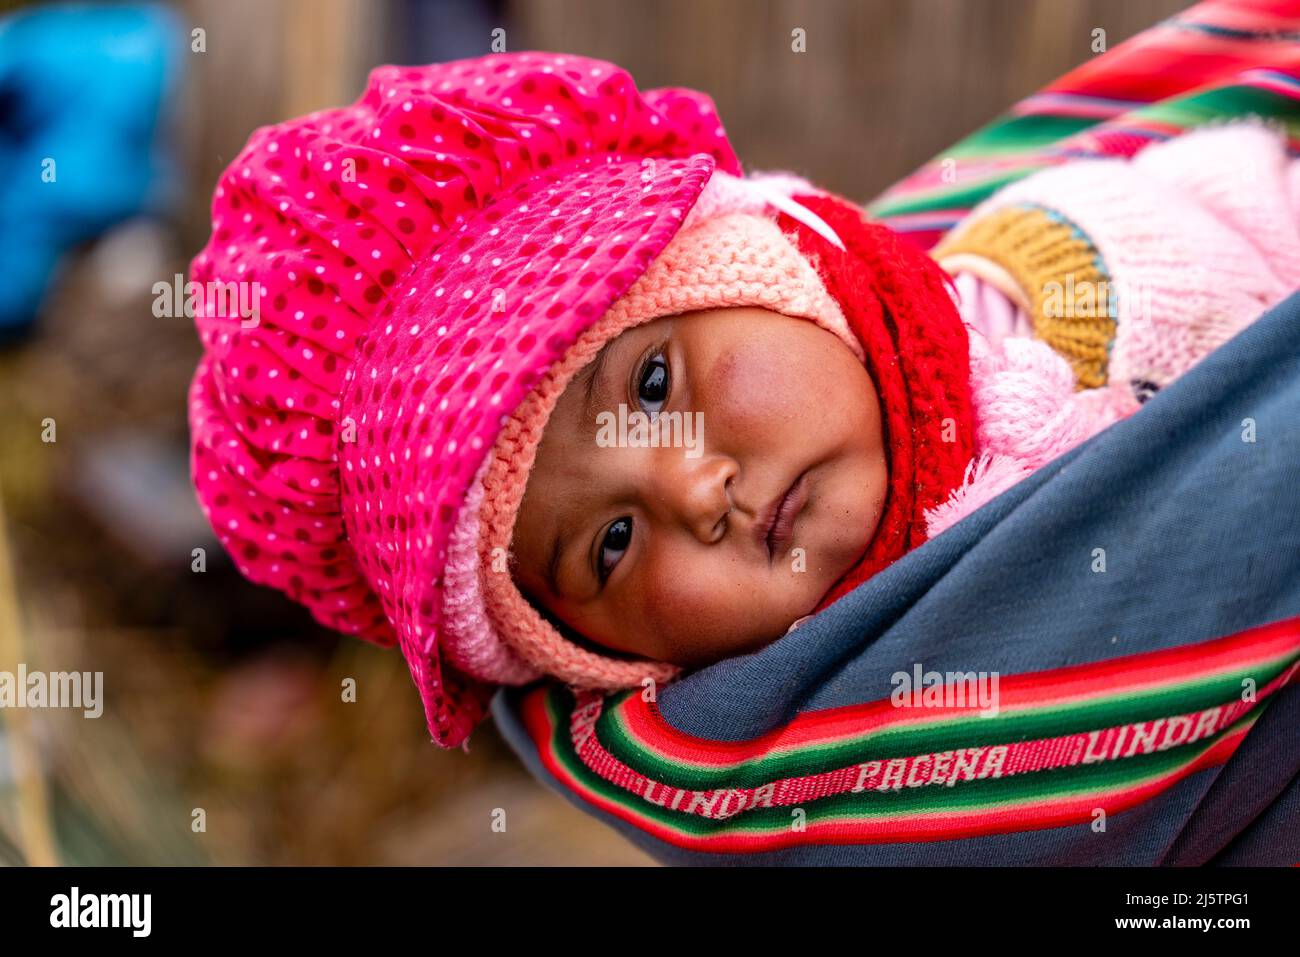 An Uros Baby being Carried In A Sling On The Uros Floating Islands, Lake Titicaca, Puno, Peru. Stock Photo